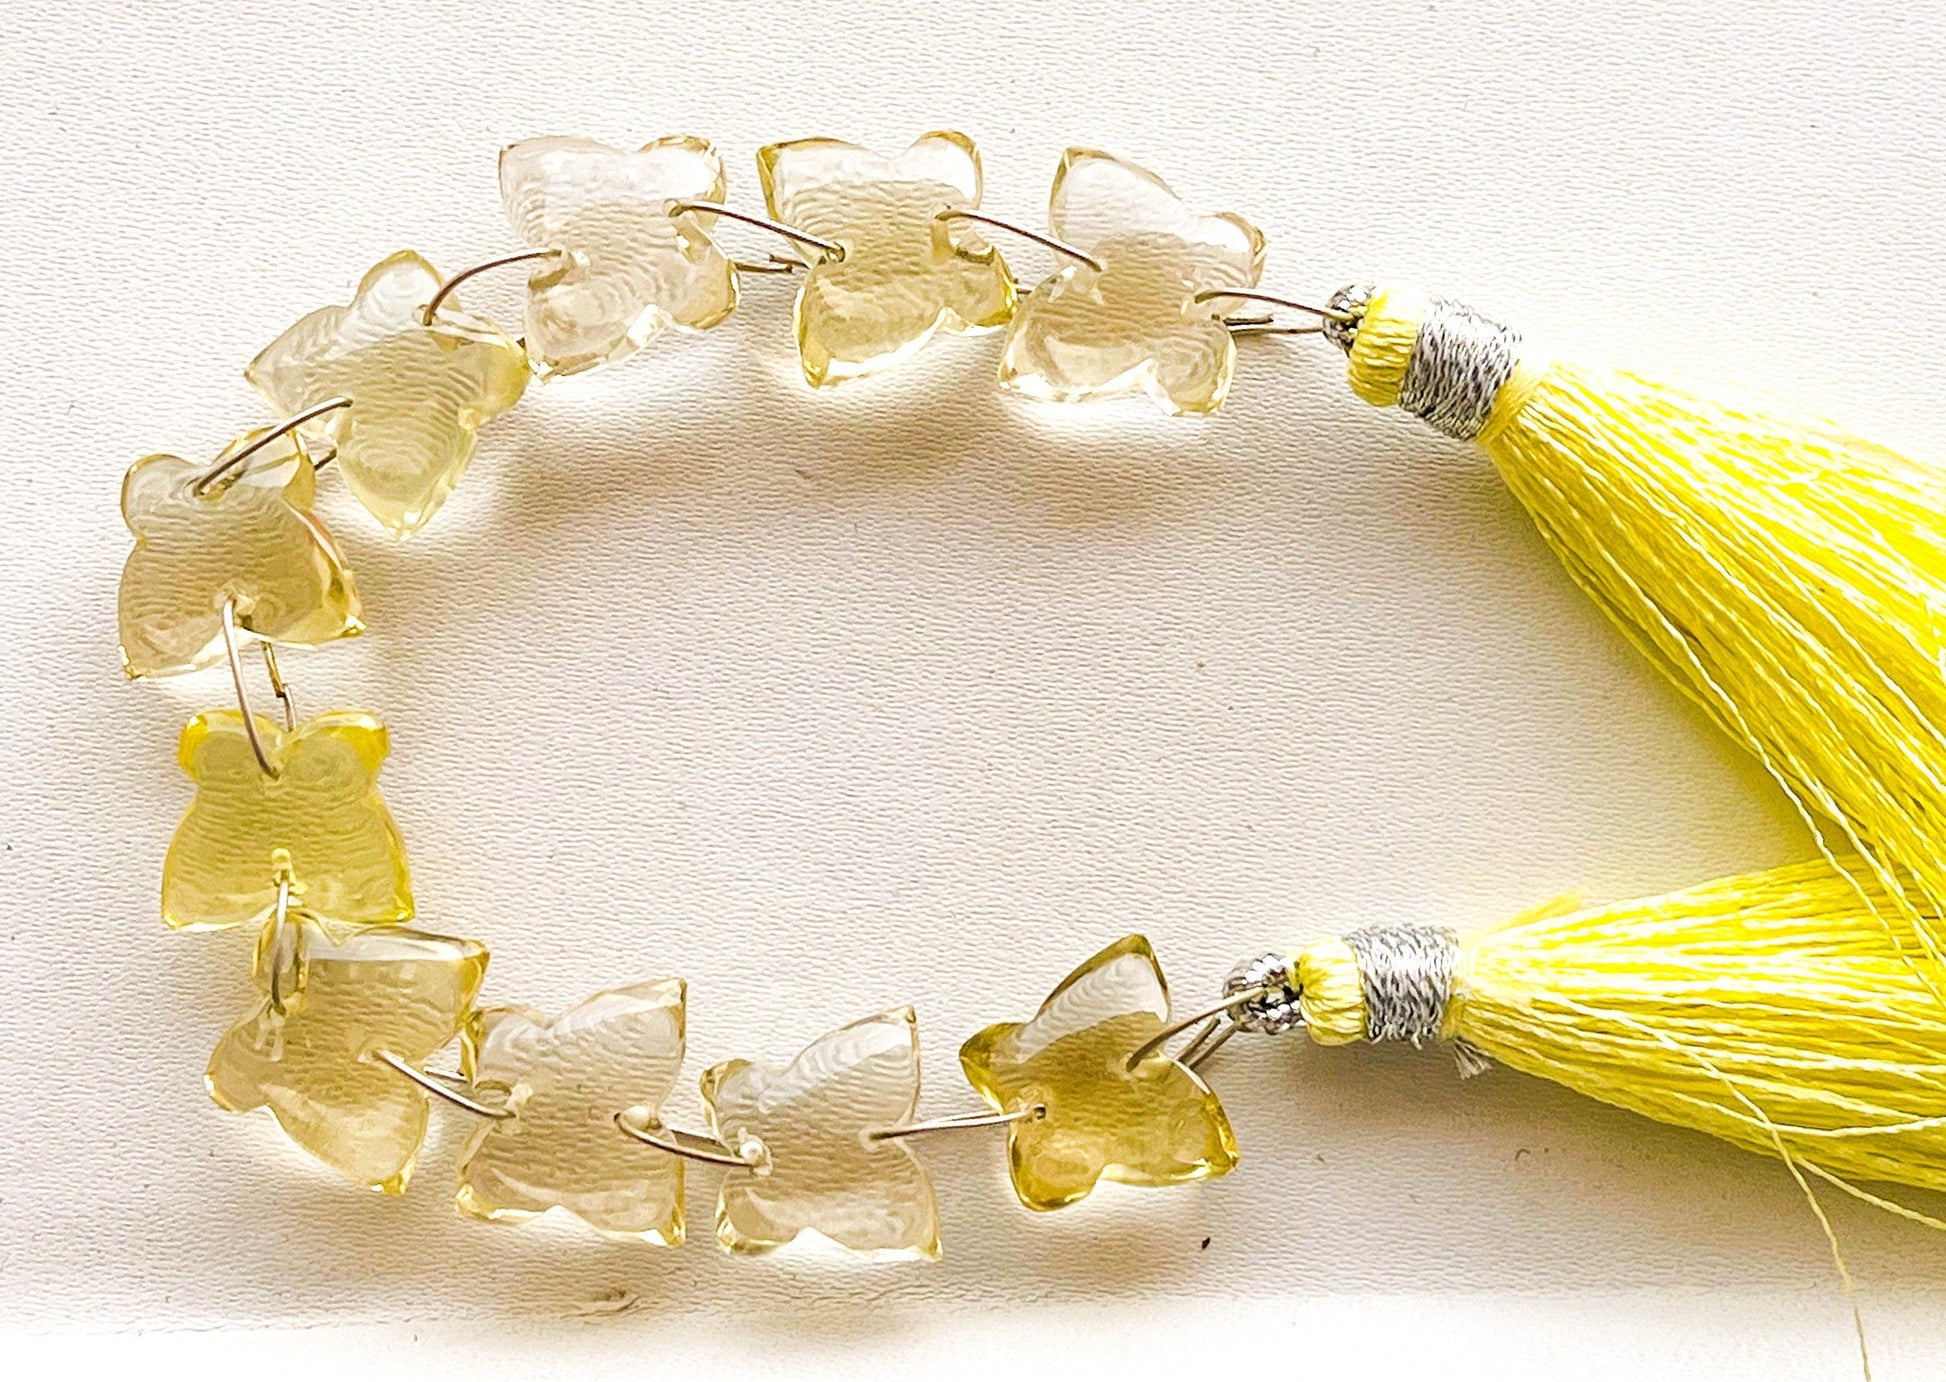 Lemon Quartz Smooth Butterfly Shape Double Drill Beads, Rare Gemstone Design for Jewelry Making, 10x12mm, 10 Pieces String Beadsforyourjewelry